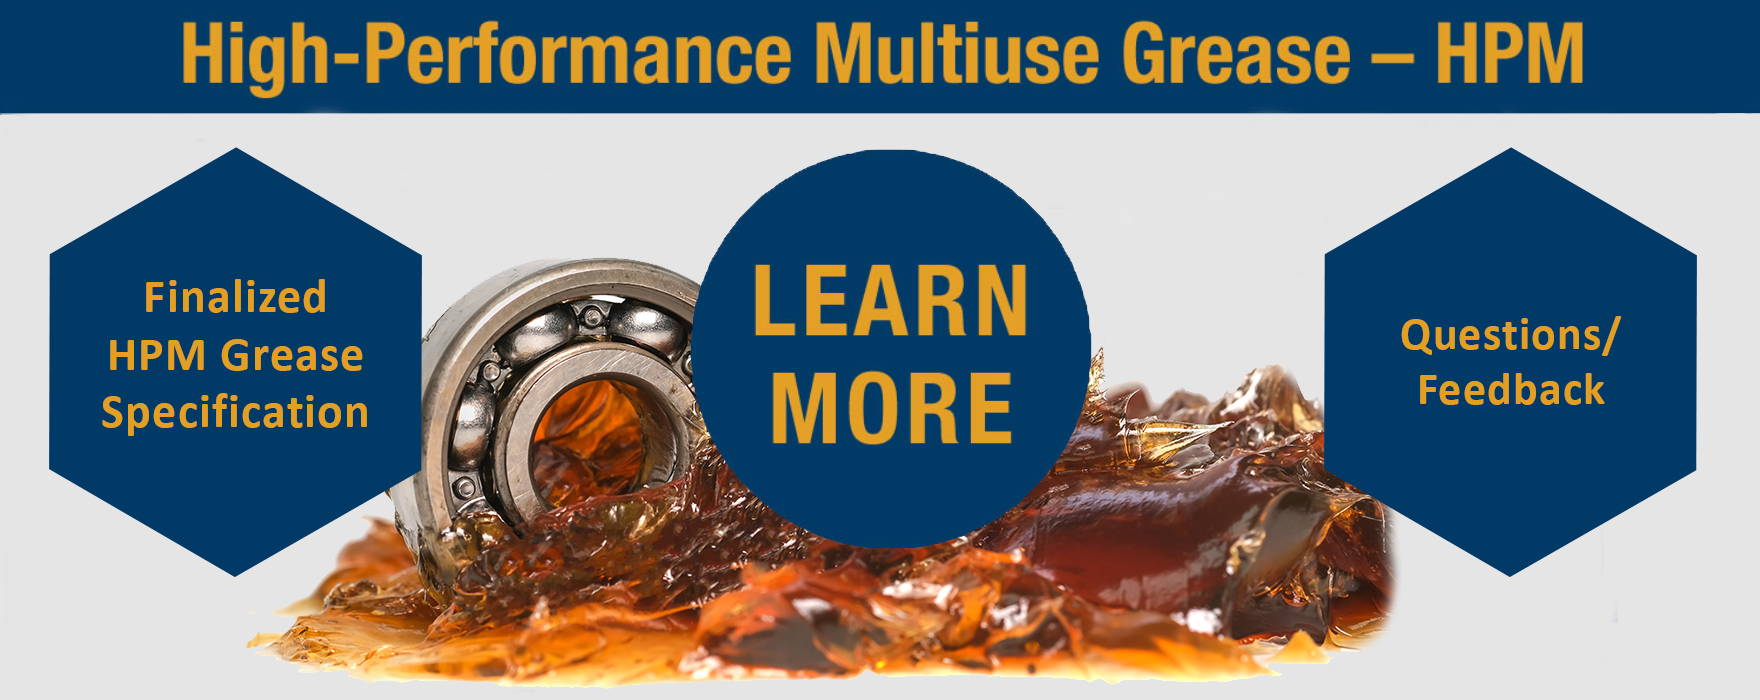 High-Performance Multiuse Grease